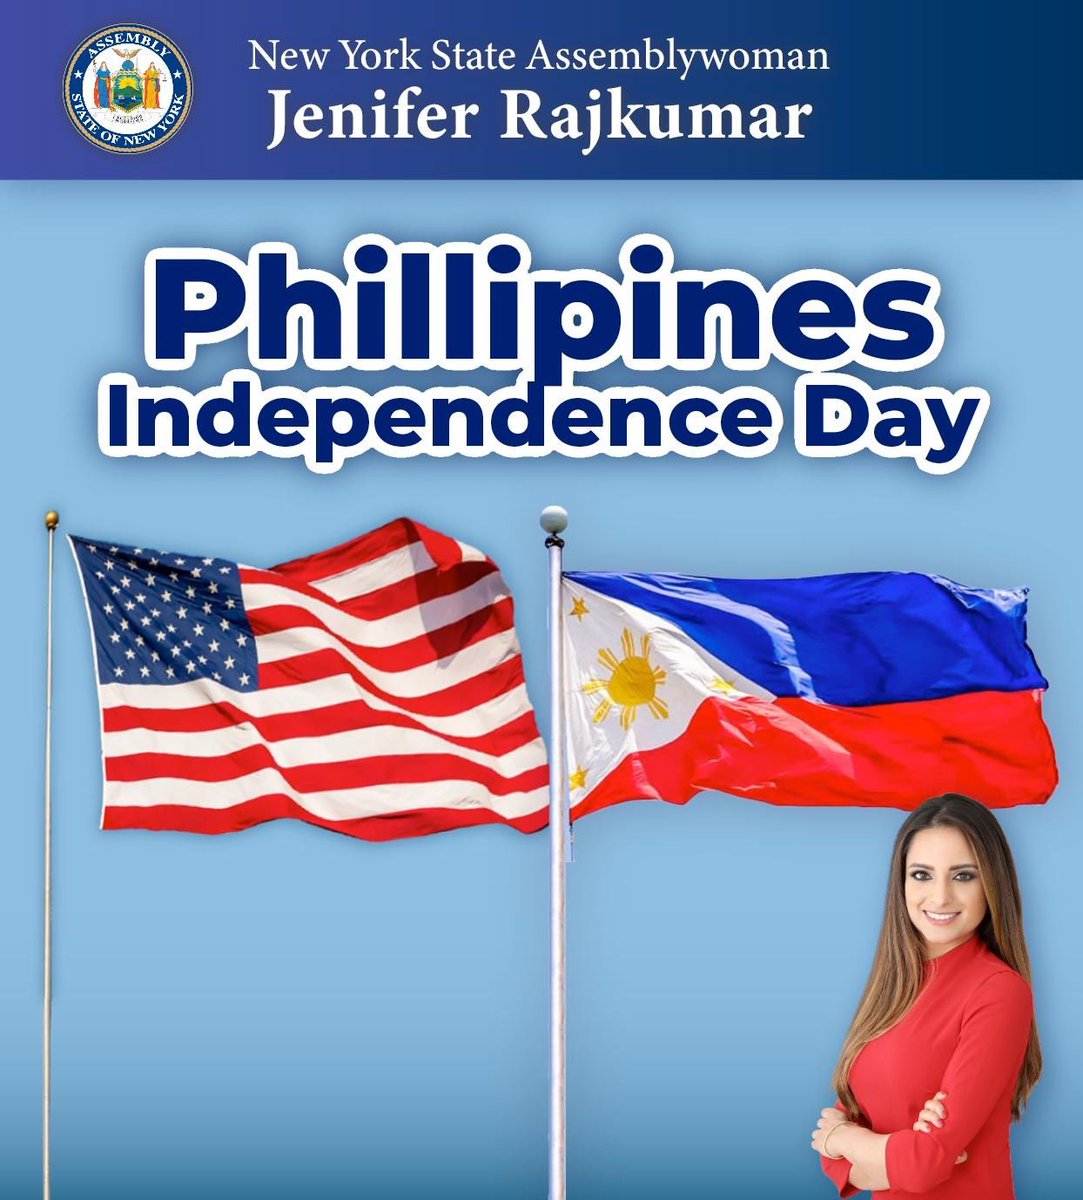 Happy Independence Day to the Philippines! For over 100 yrs, Filipino New Yorkers have made immeasurable contributions in NYC. They continue making history, including my friend @RagaForQueens who became the first Filipino in the NYS Assembly. Maligayang Araw ng Kalayaan!🇵🇭🇺🇸